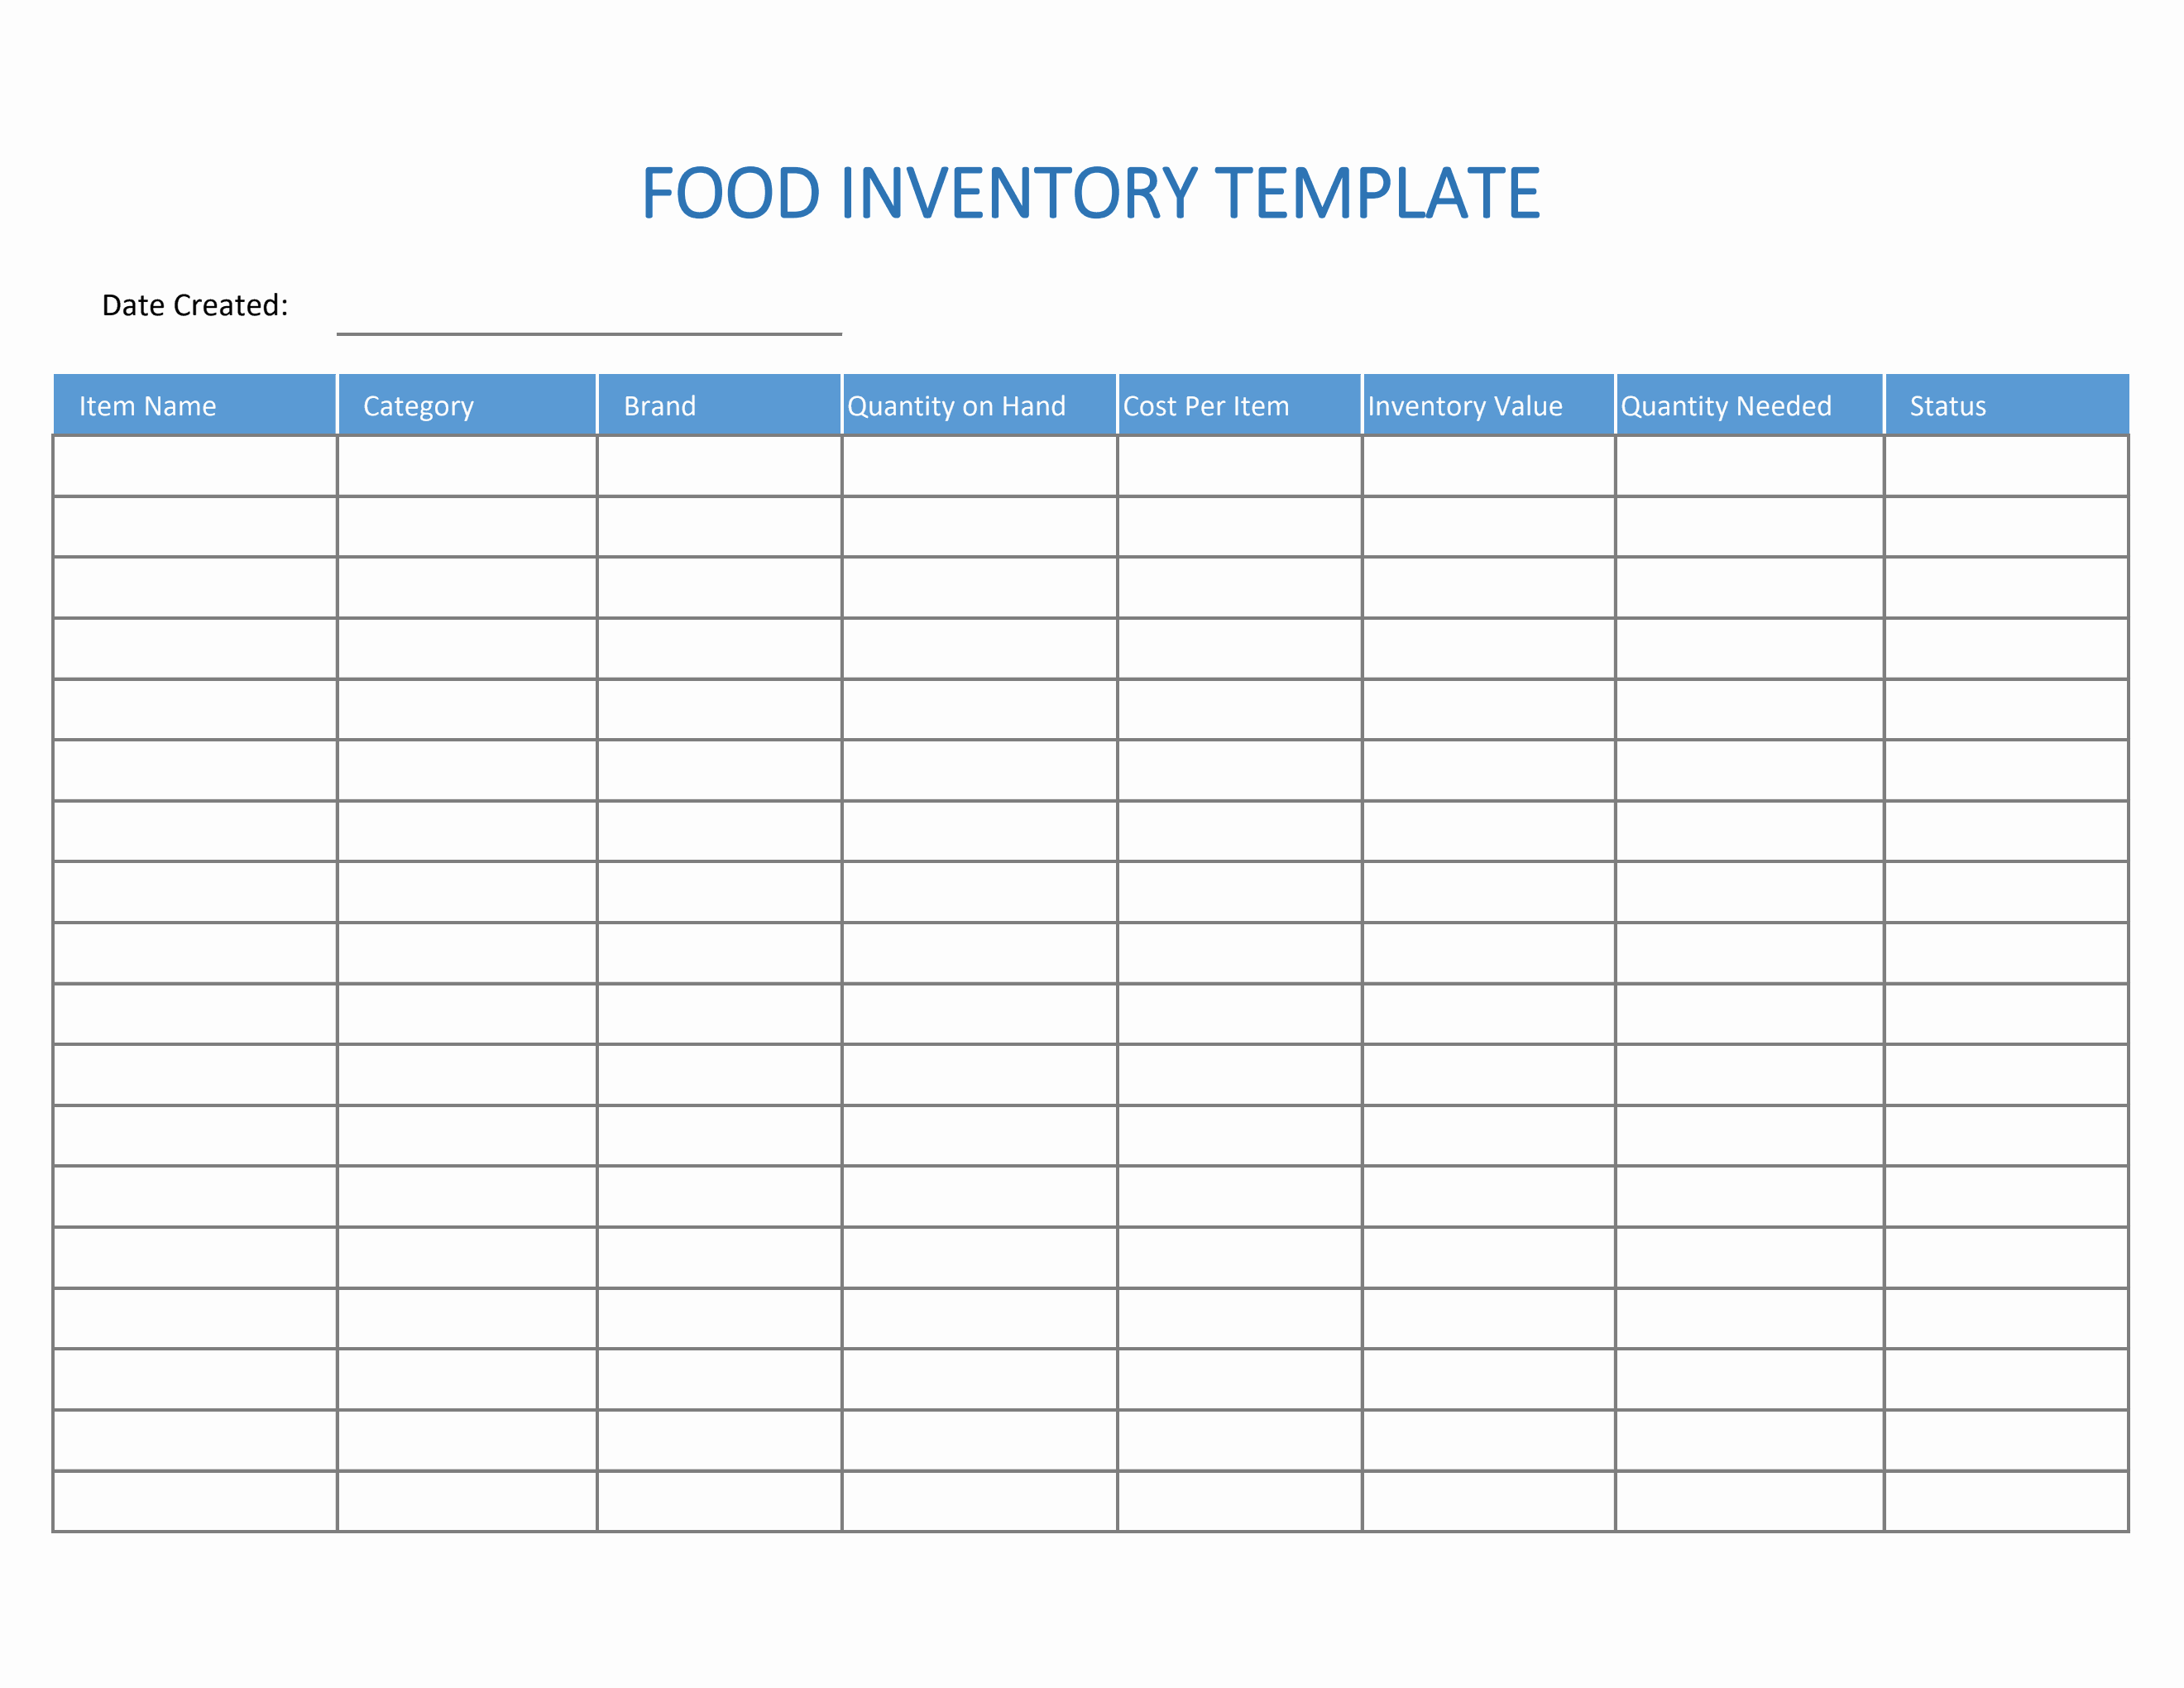 inventory count food inventory sheet printable